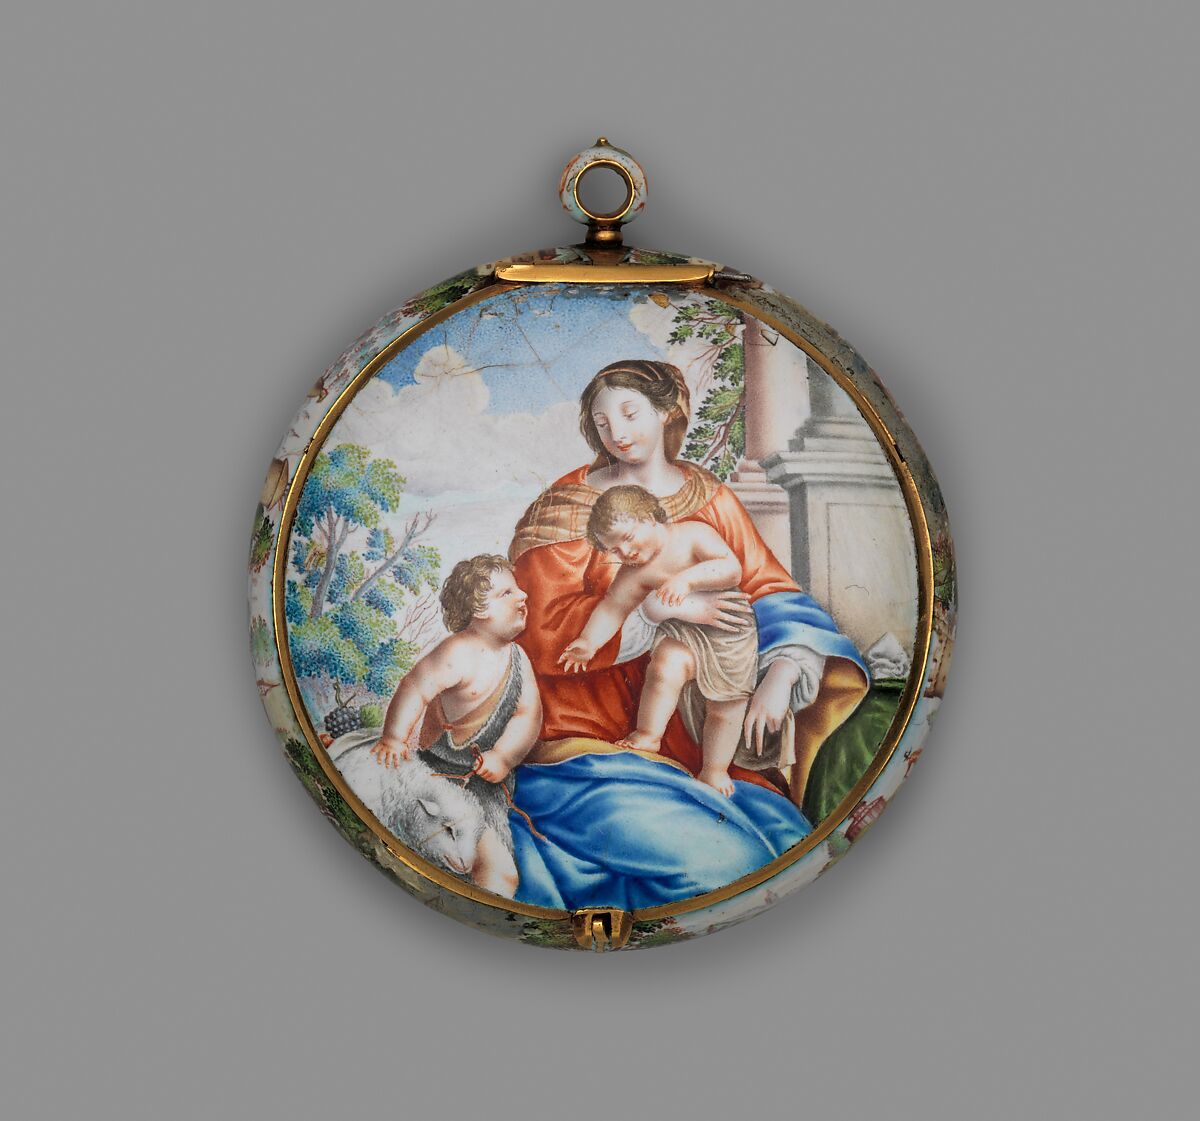 Watch, Watchmaker: Jacques Goullons (French, active Paris, 1626–died 1671), Case and dial: painted enamel on gold; Movement: gilded brass and steel, partly blued, French, Paris or Blois 